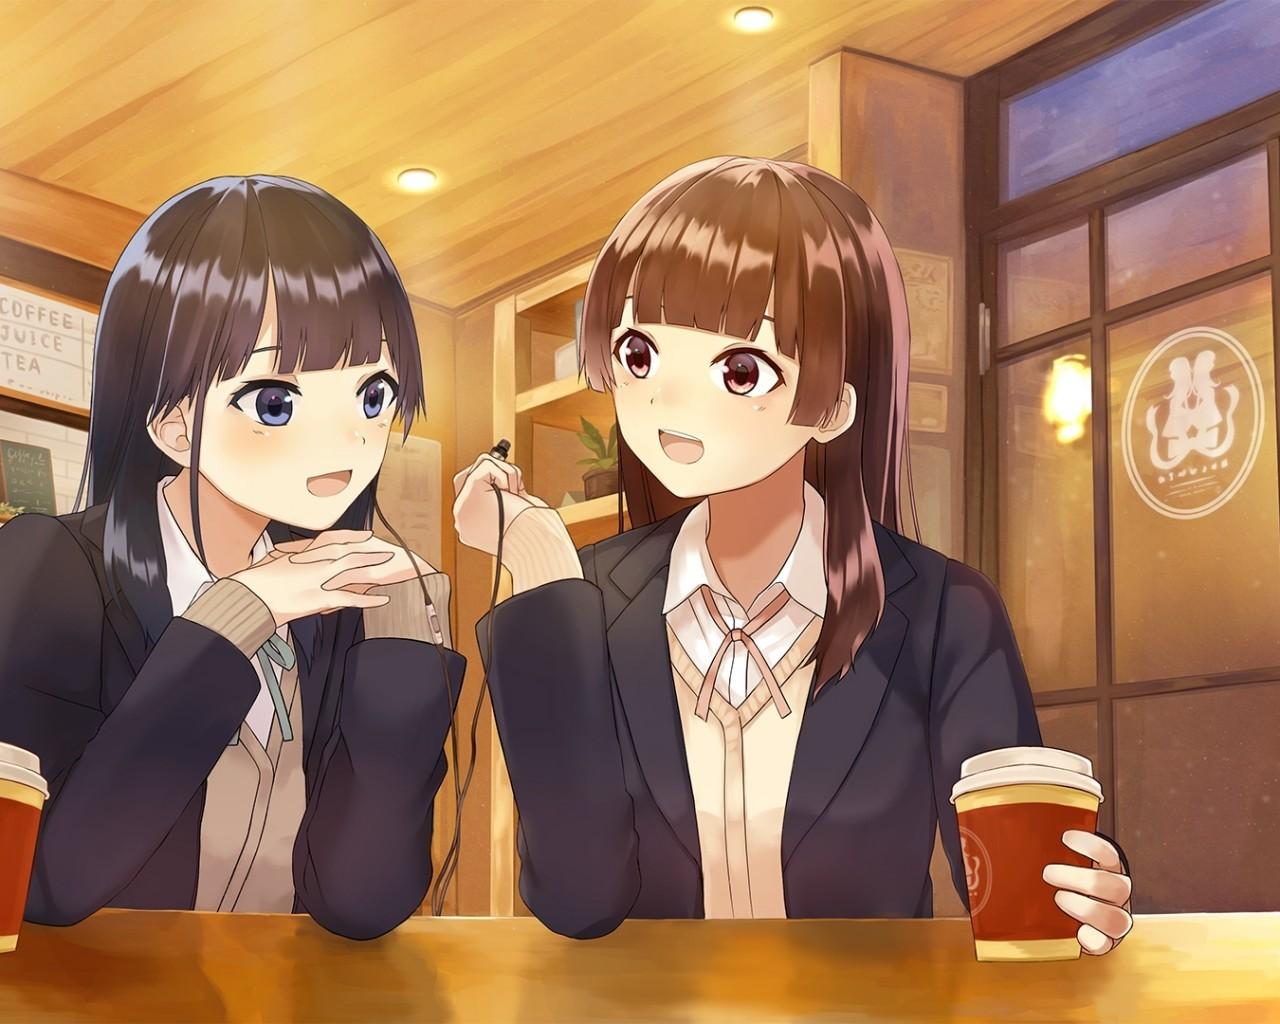 Download 1280x1024 Anime Girls, Coffee, Cafe, Friends